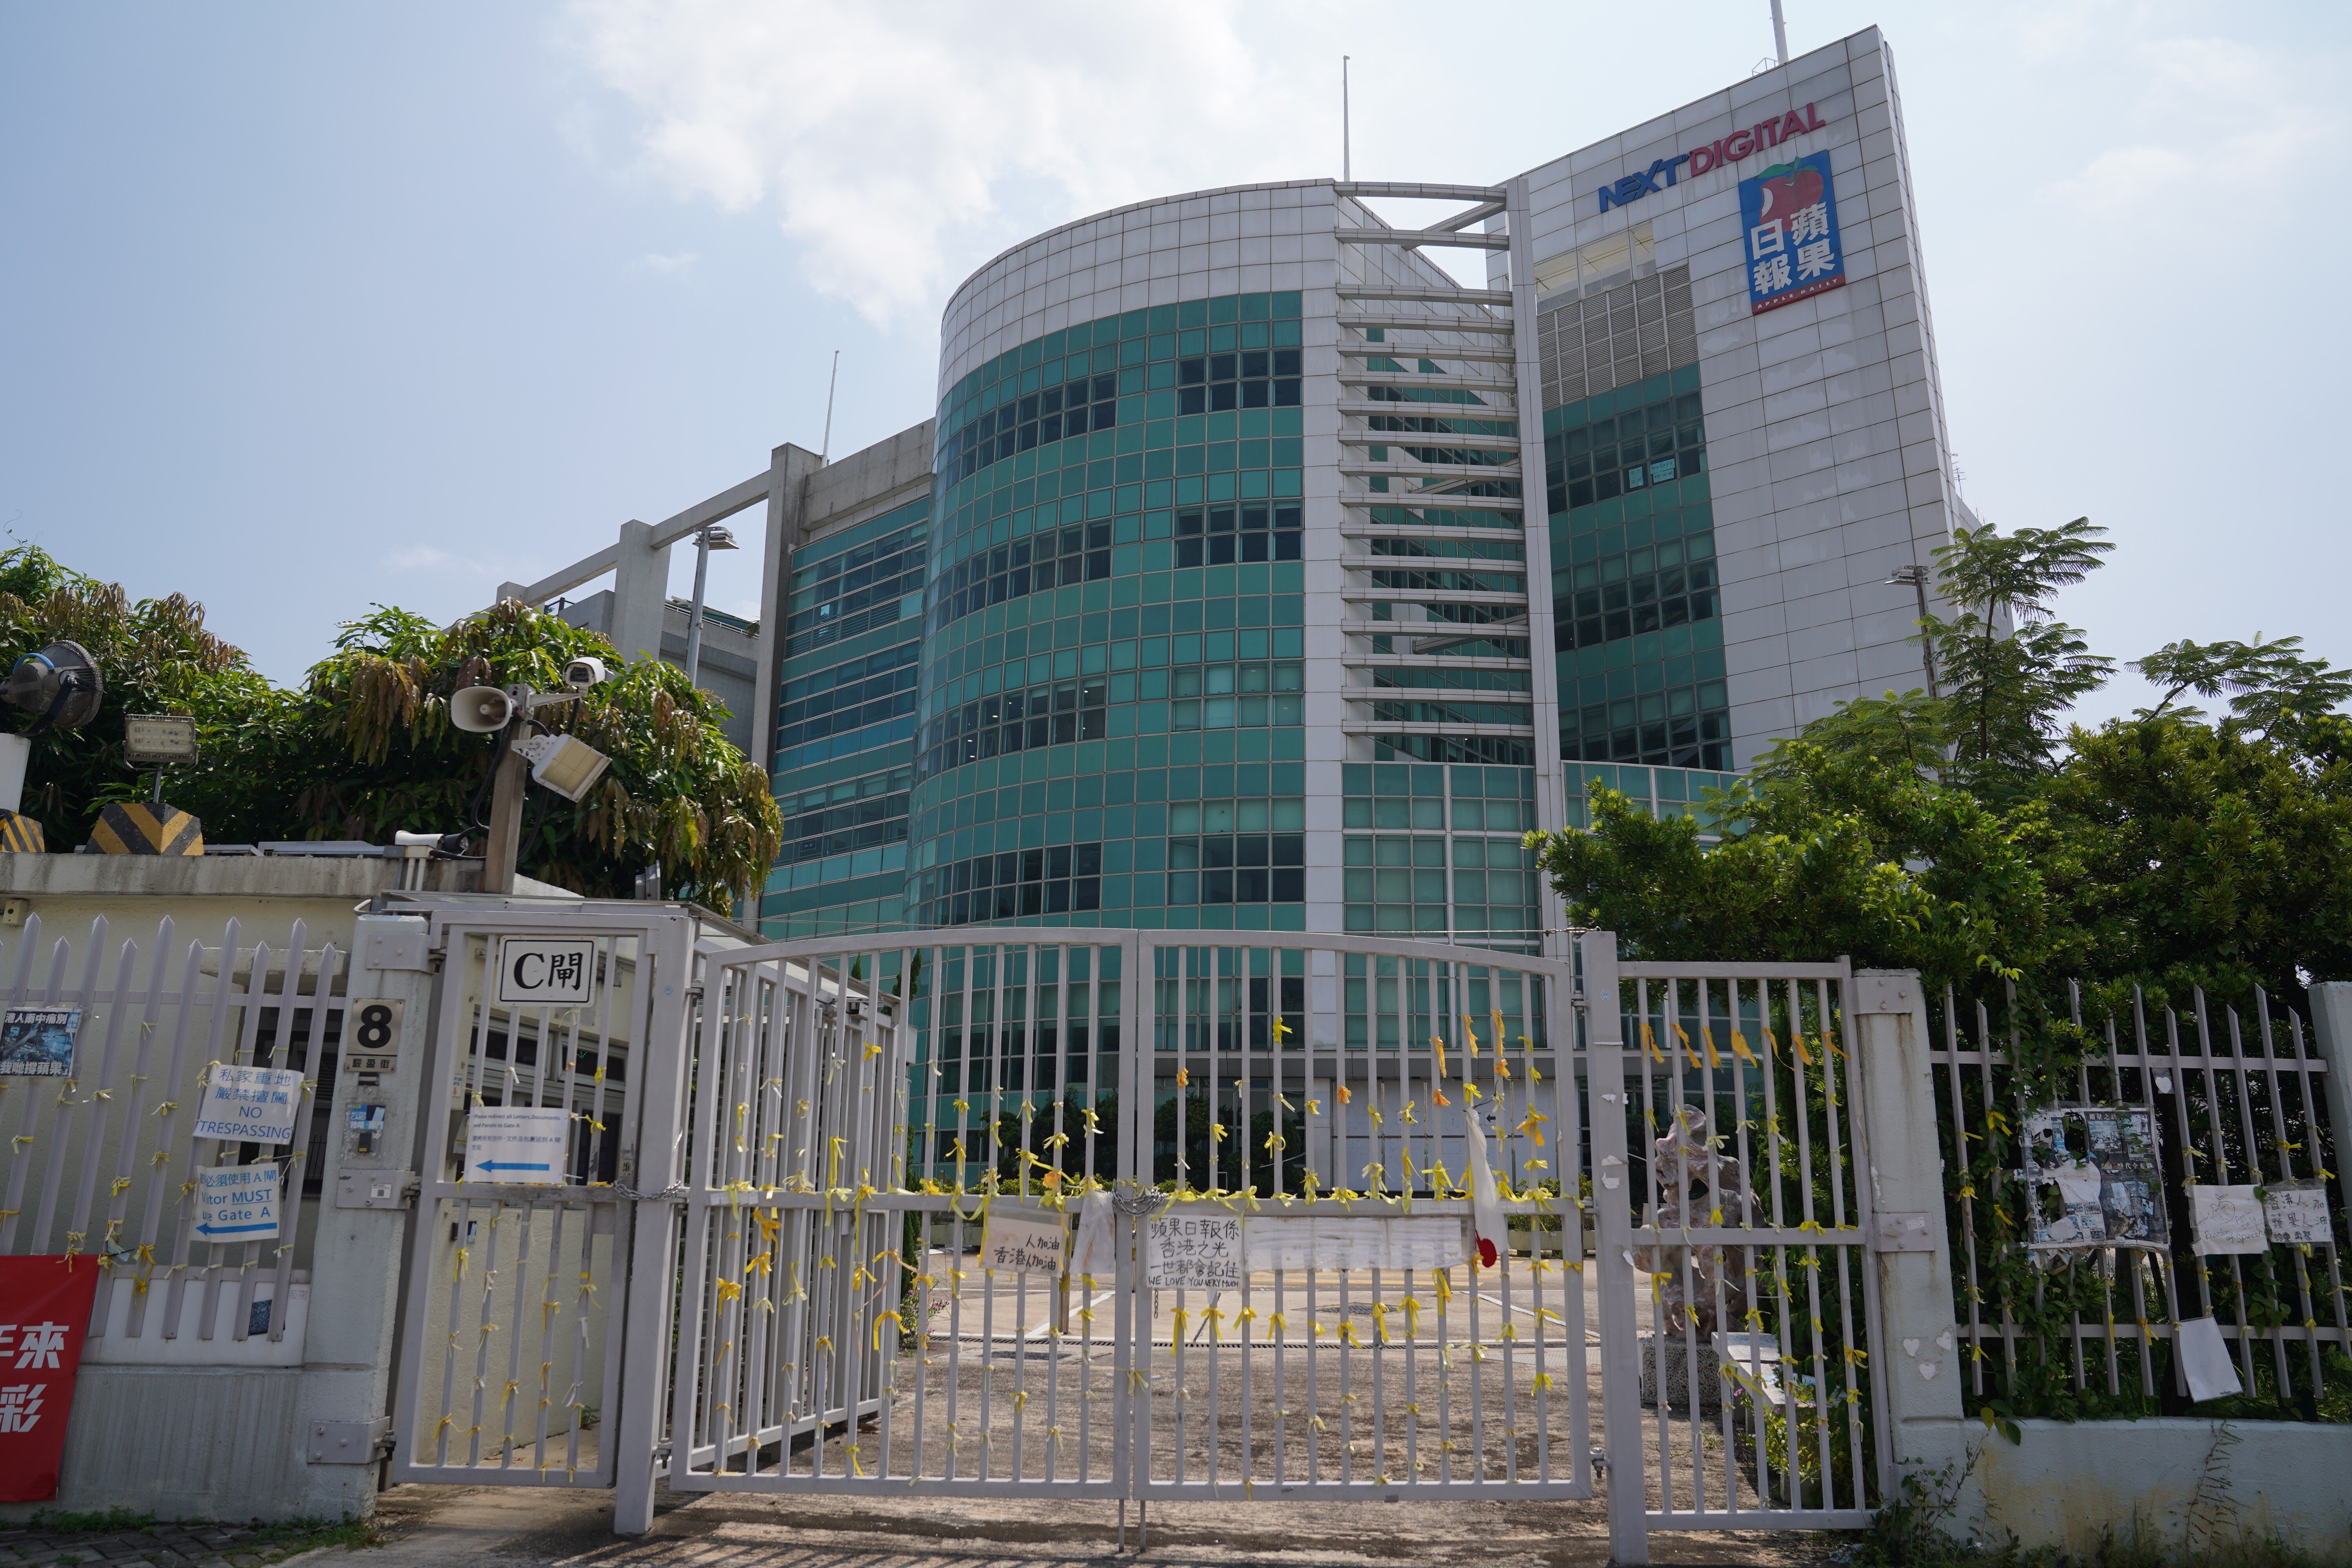 The offices of Next Digital, which published Apple Daily. Photo: Sam Tsang